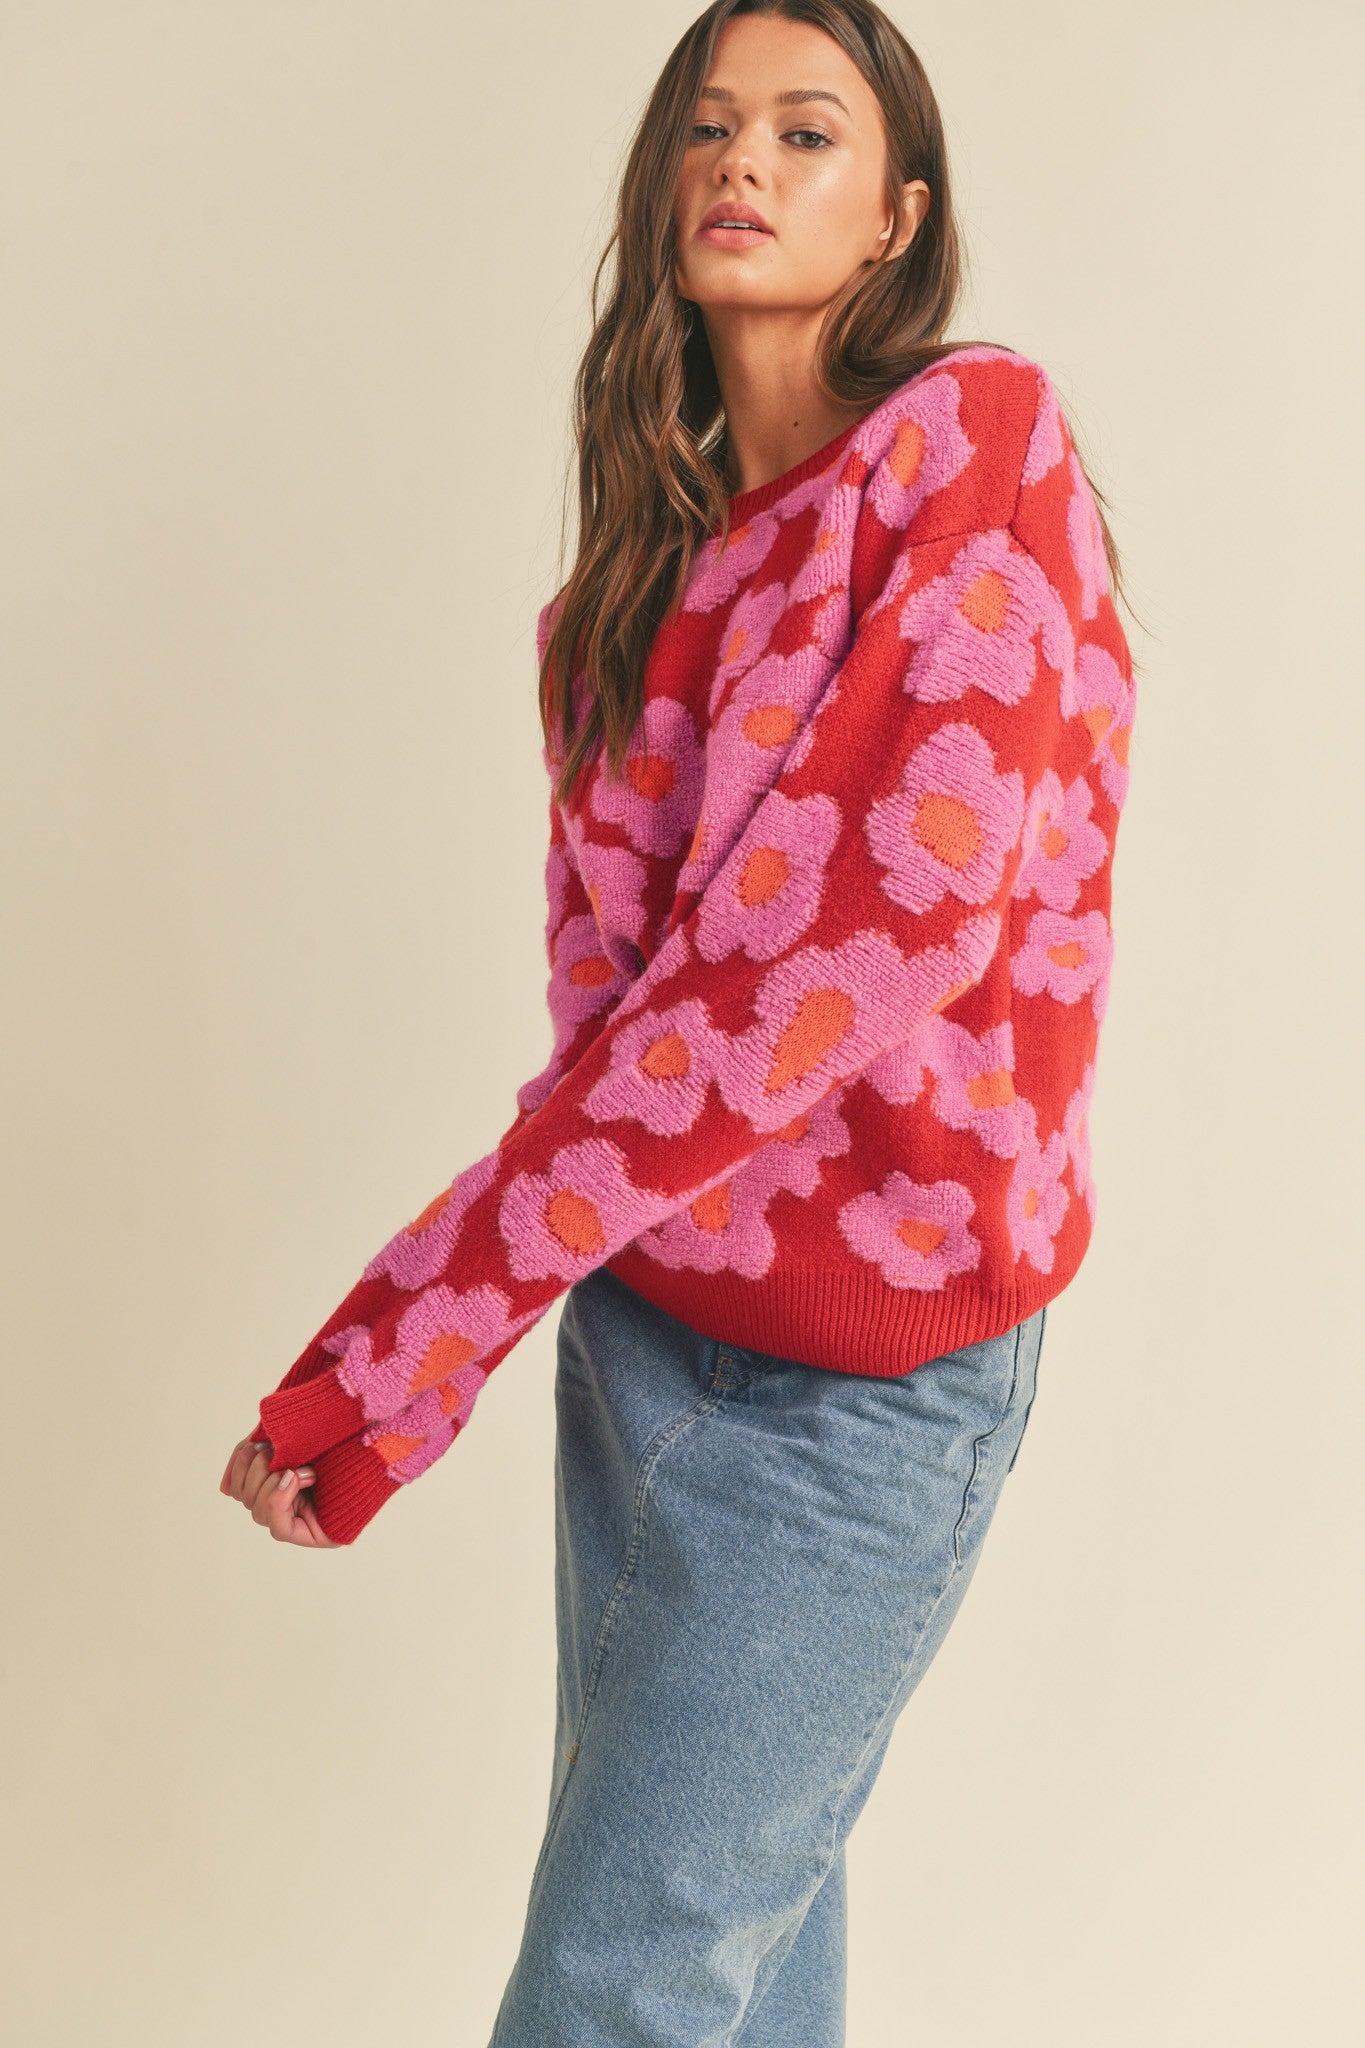 AMAYAH FLORAL KNIT SWEATER-red floral,long sleeves,round neck,ribbed edges,pink and red flower pattern